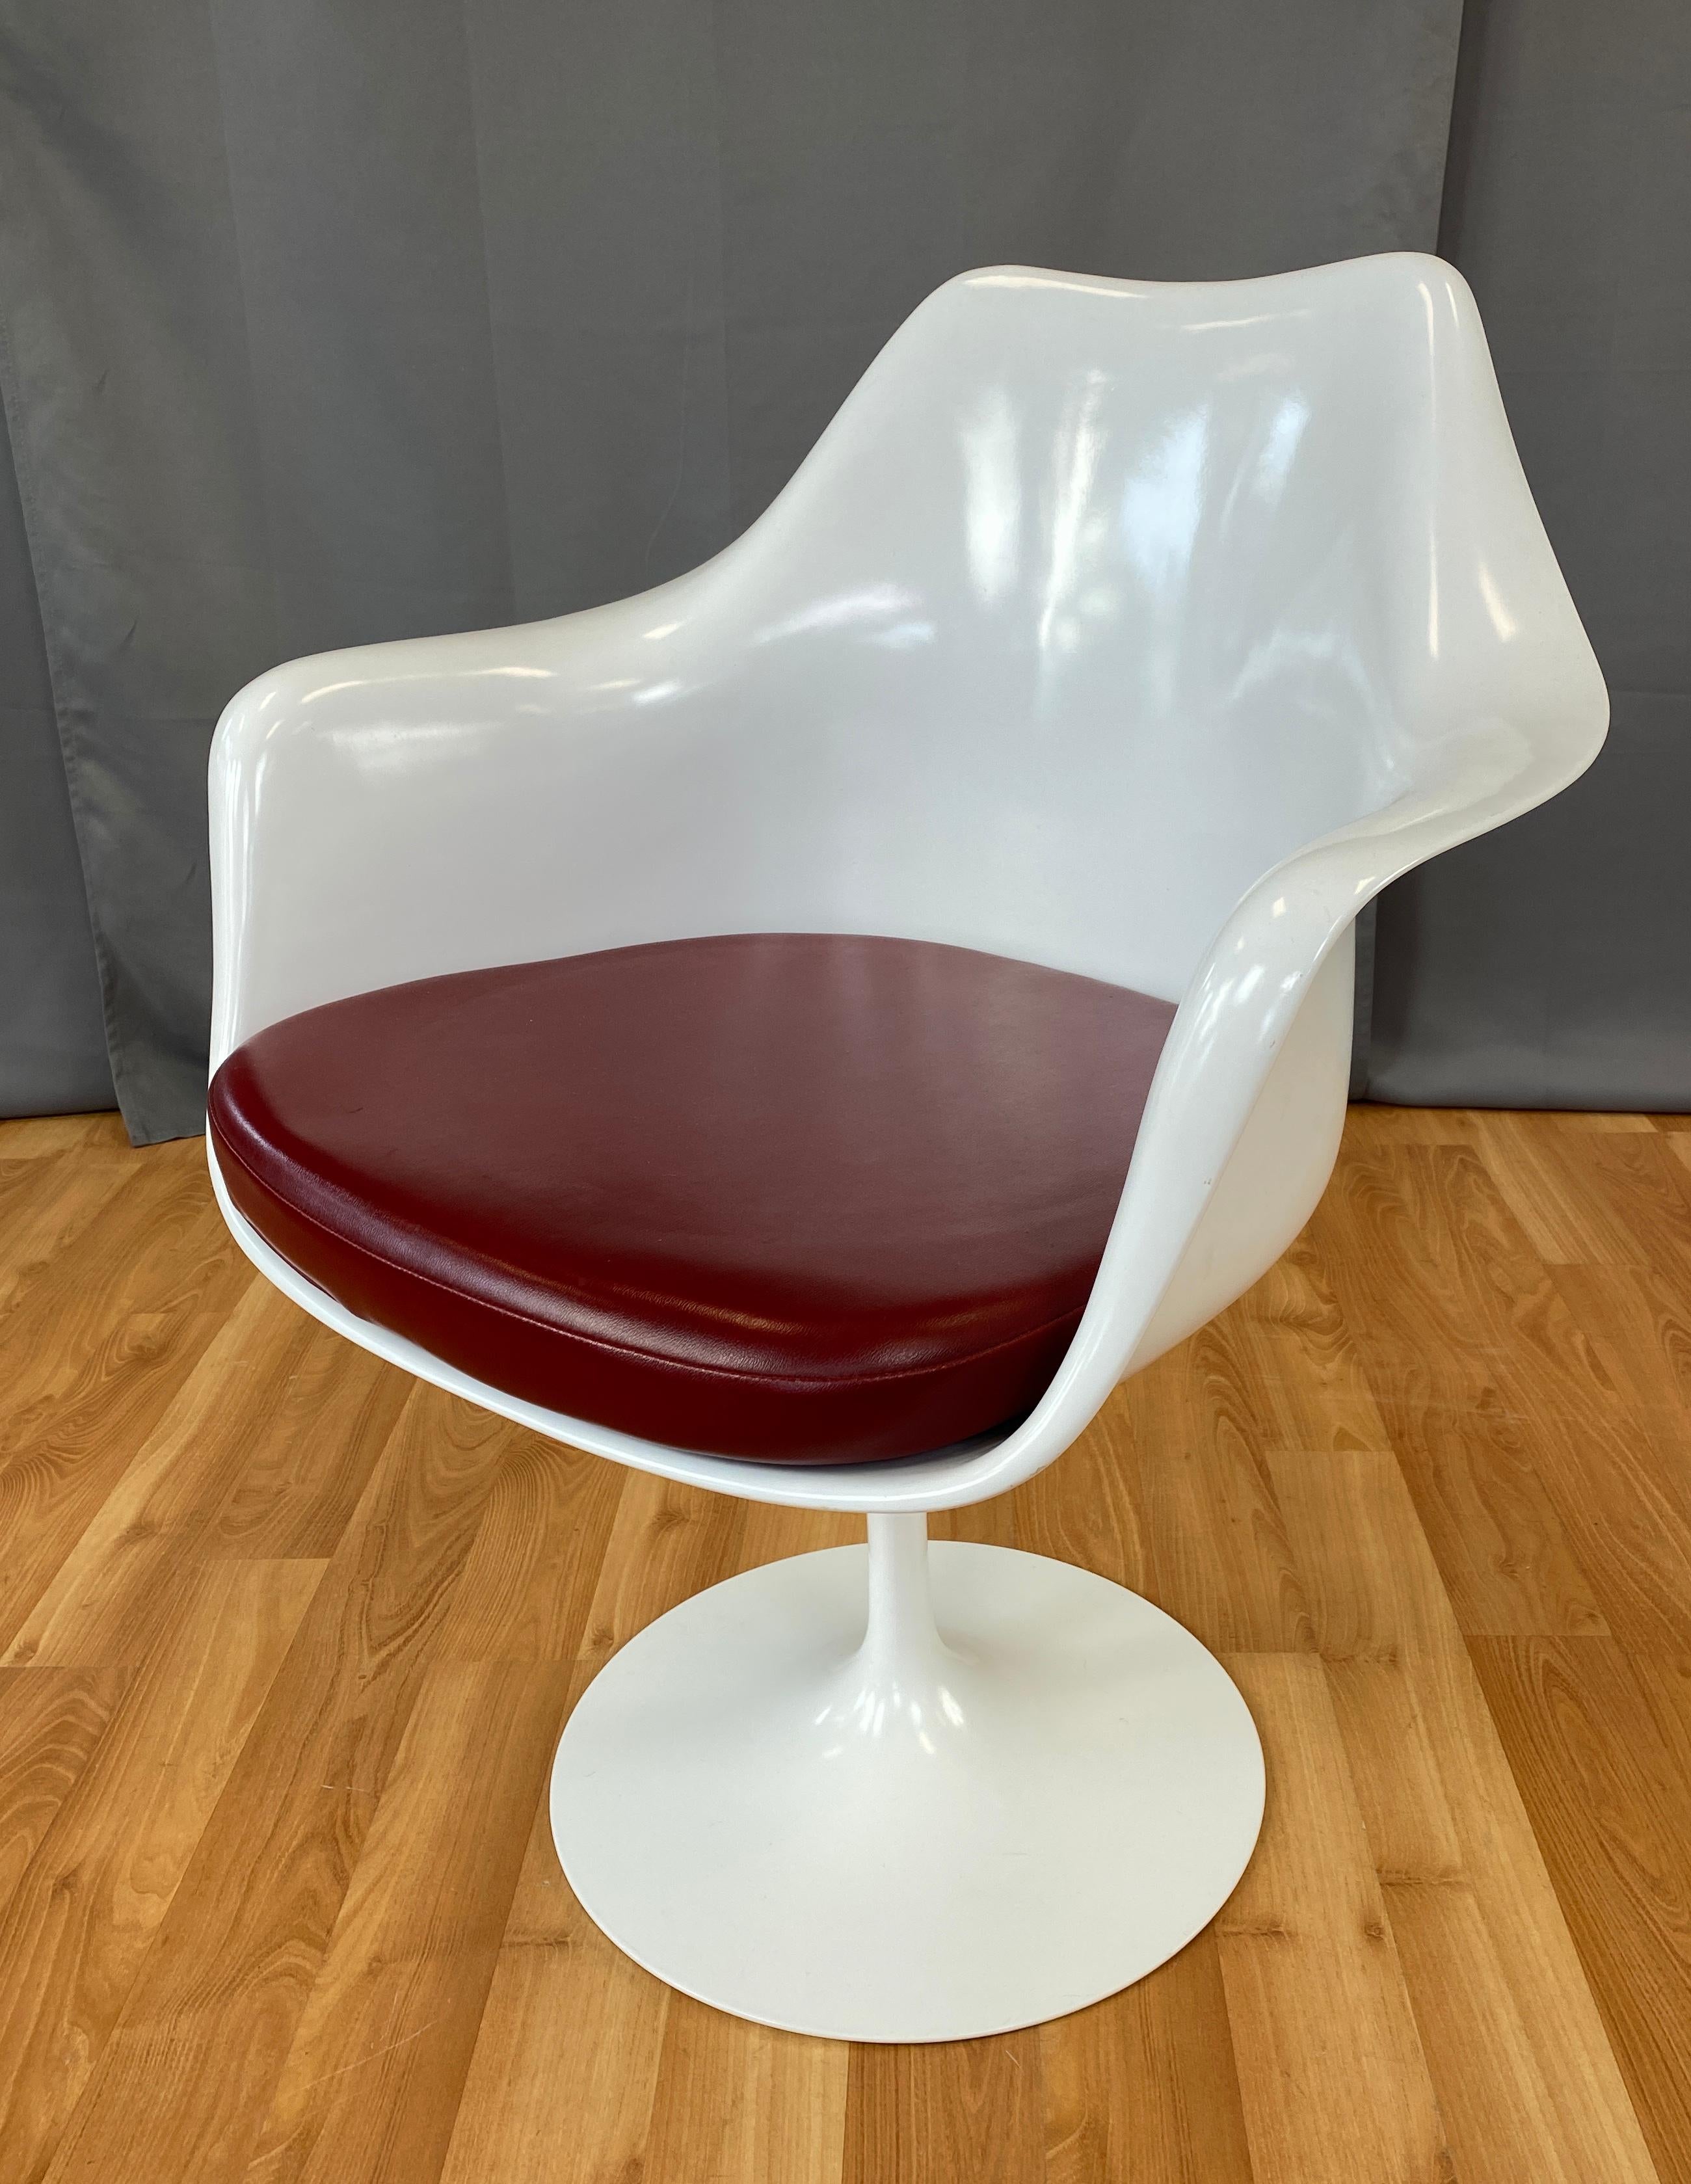 Offered here is a white Tulip armchair designed by Eero Saarinen and made by Knoll.
All white chair, with Ox Blood leather upholstery, on Knoll's web site we think it's Yolo Leather Garnet.
 